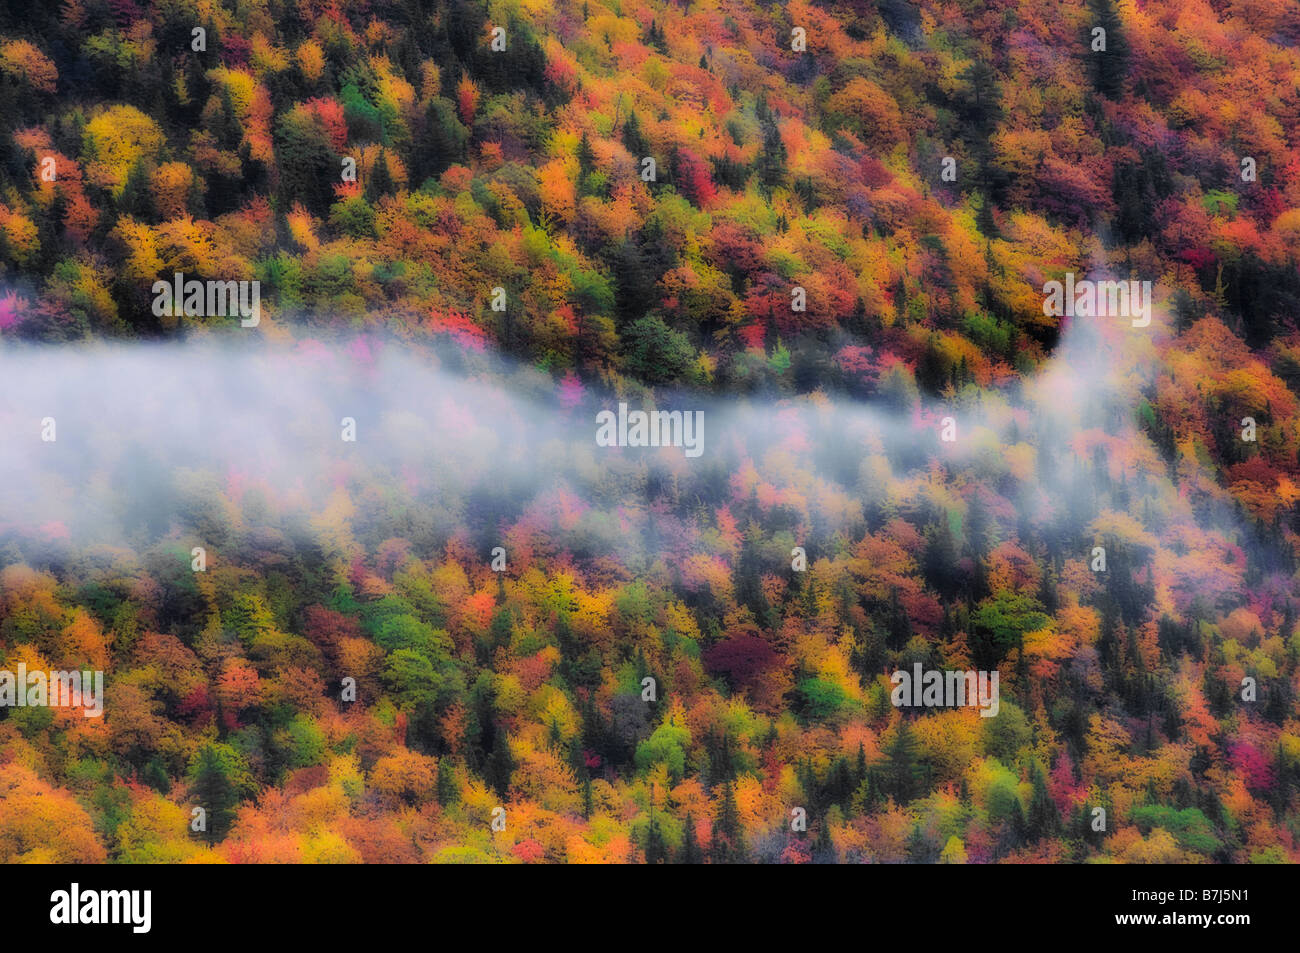 Early Morning Mist Floats Over Autumn Forest In Cape Breton Highlands